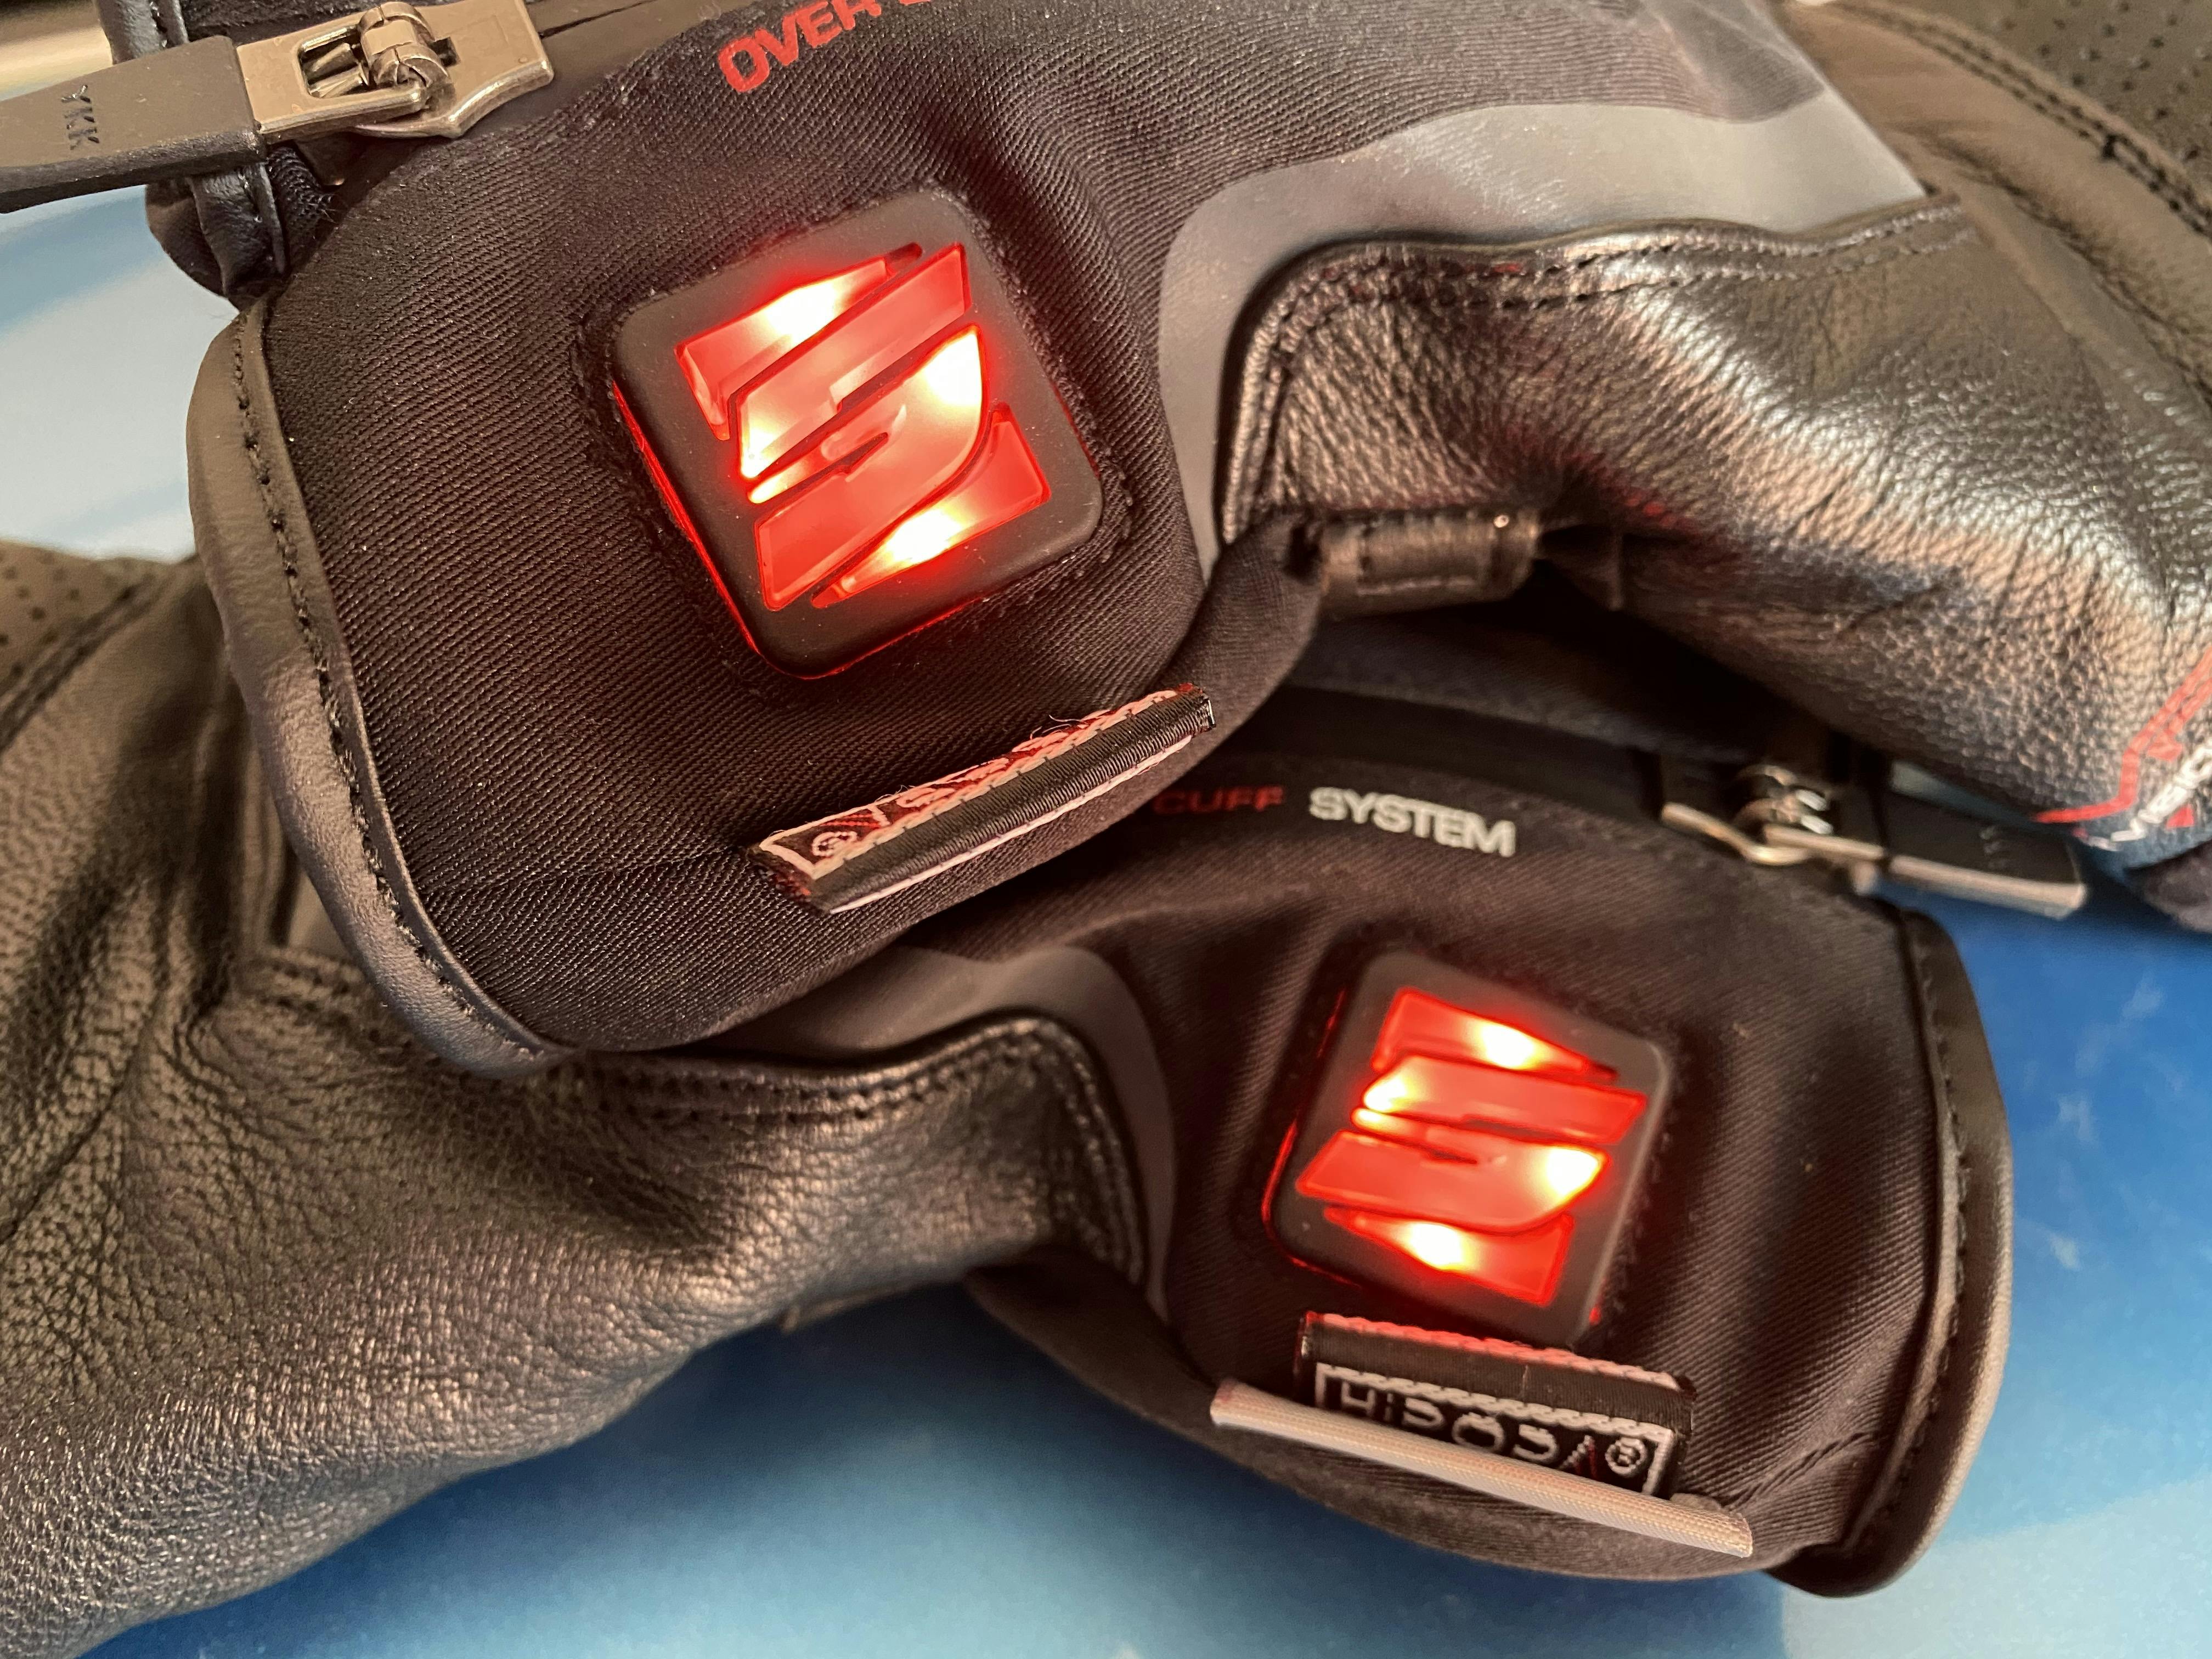 Heated bike gloves review